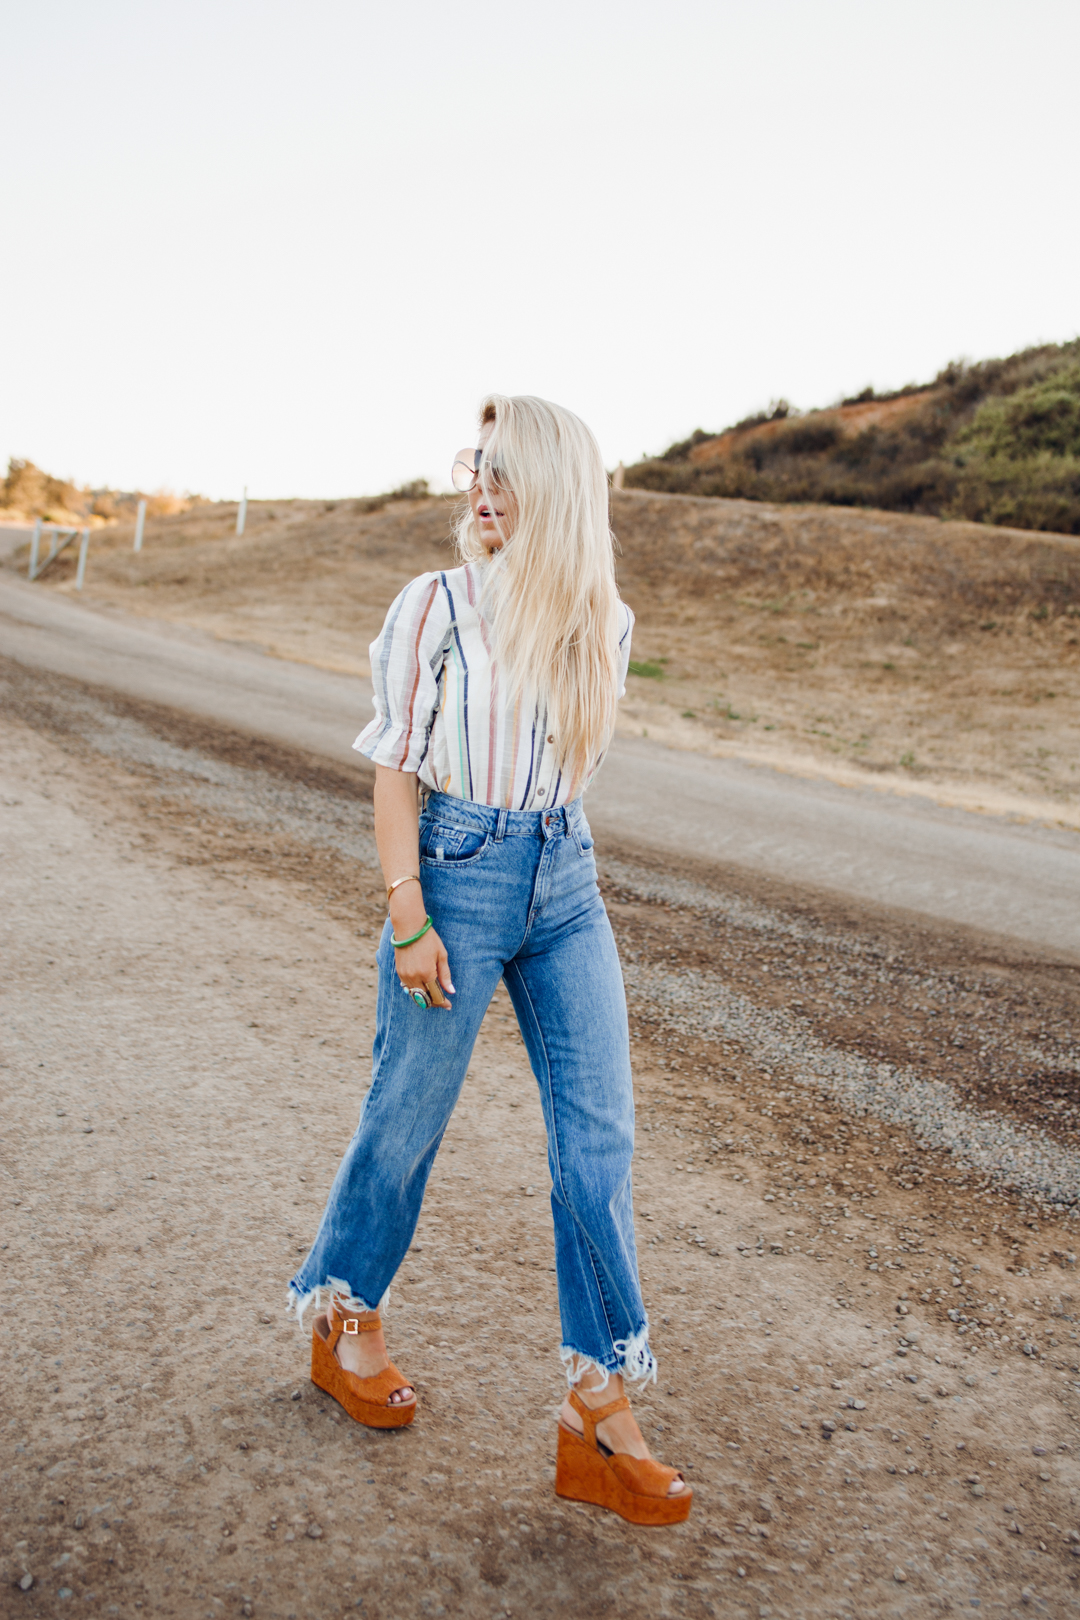 WIDE LEG JEANS AND PLATFORMS